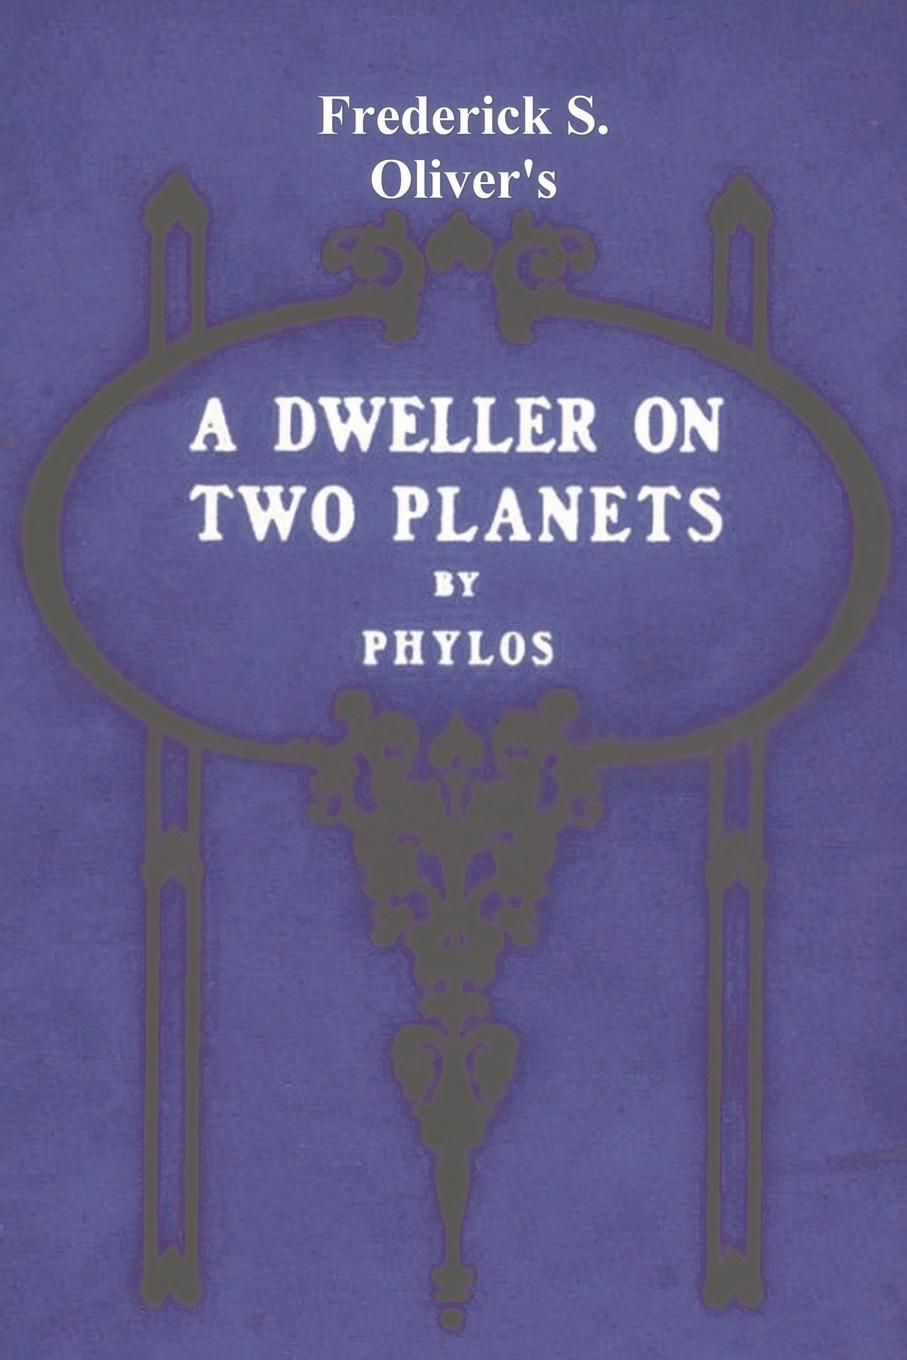 Book A Dweller on Two Planets Frederick S. Oliver